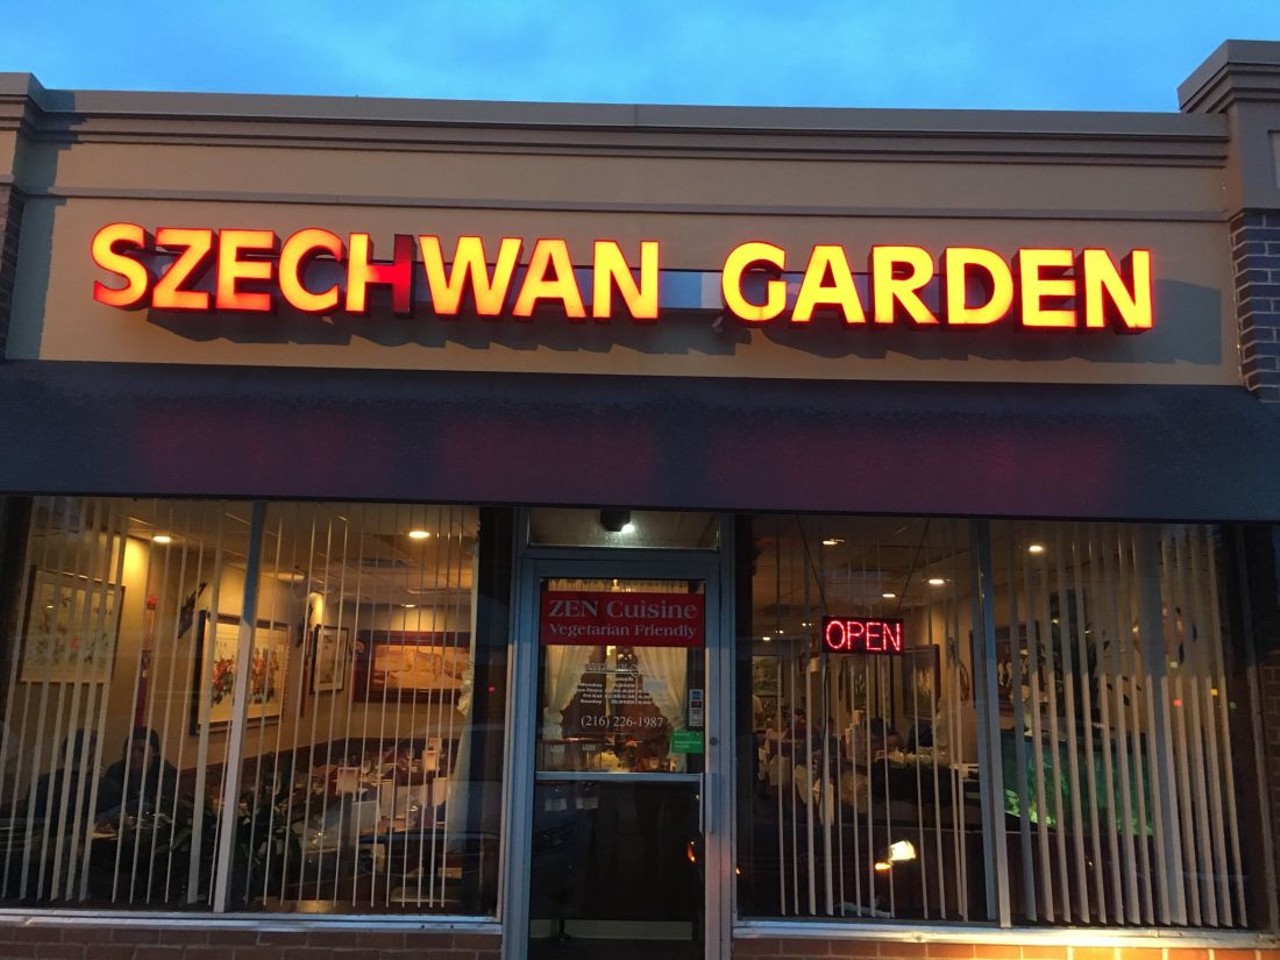  Szechwan Garden
13800 Detroit Ave., Lakewood
&#147;Best Chinese Restaurant in Lakewood. Been getting takeout here for over 20 years. Always good food and reasonable priced. Definitely recommend for a good quick eat dine in or takeout,&#148; Kyle W. on Yelp.
Photo via Scene Archives